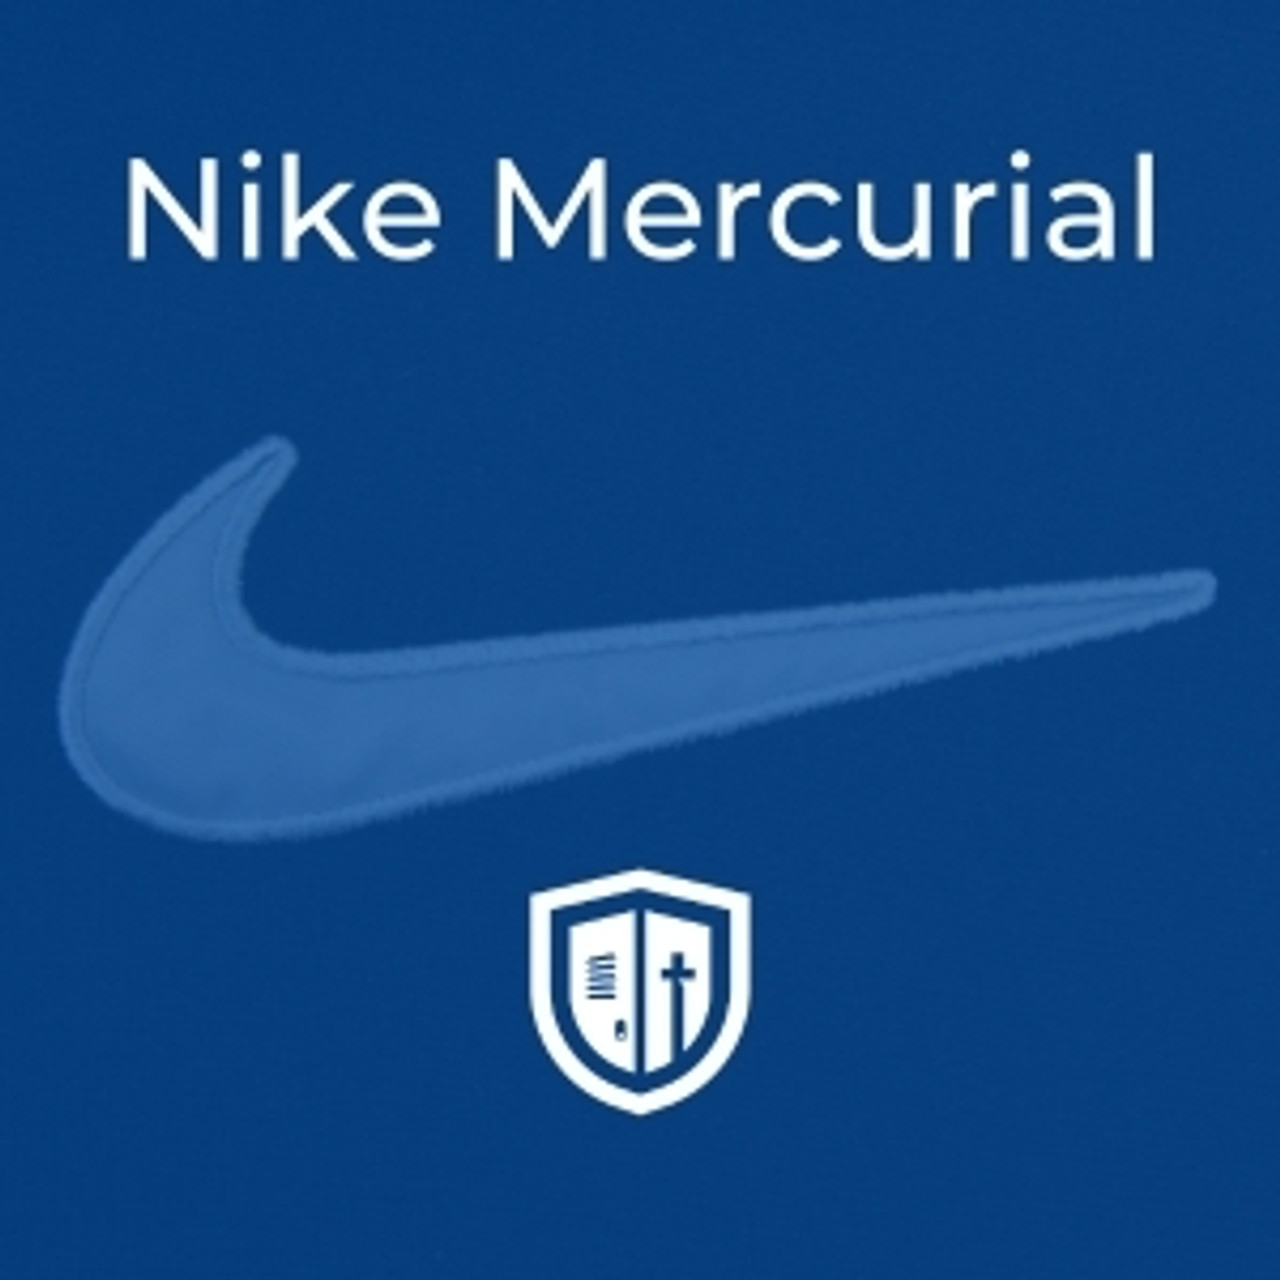 Shop Authentic Team-Issued Nike Mercurial Sports Apparel from Locker Room  Direct